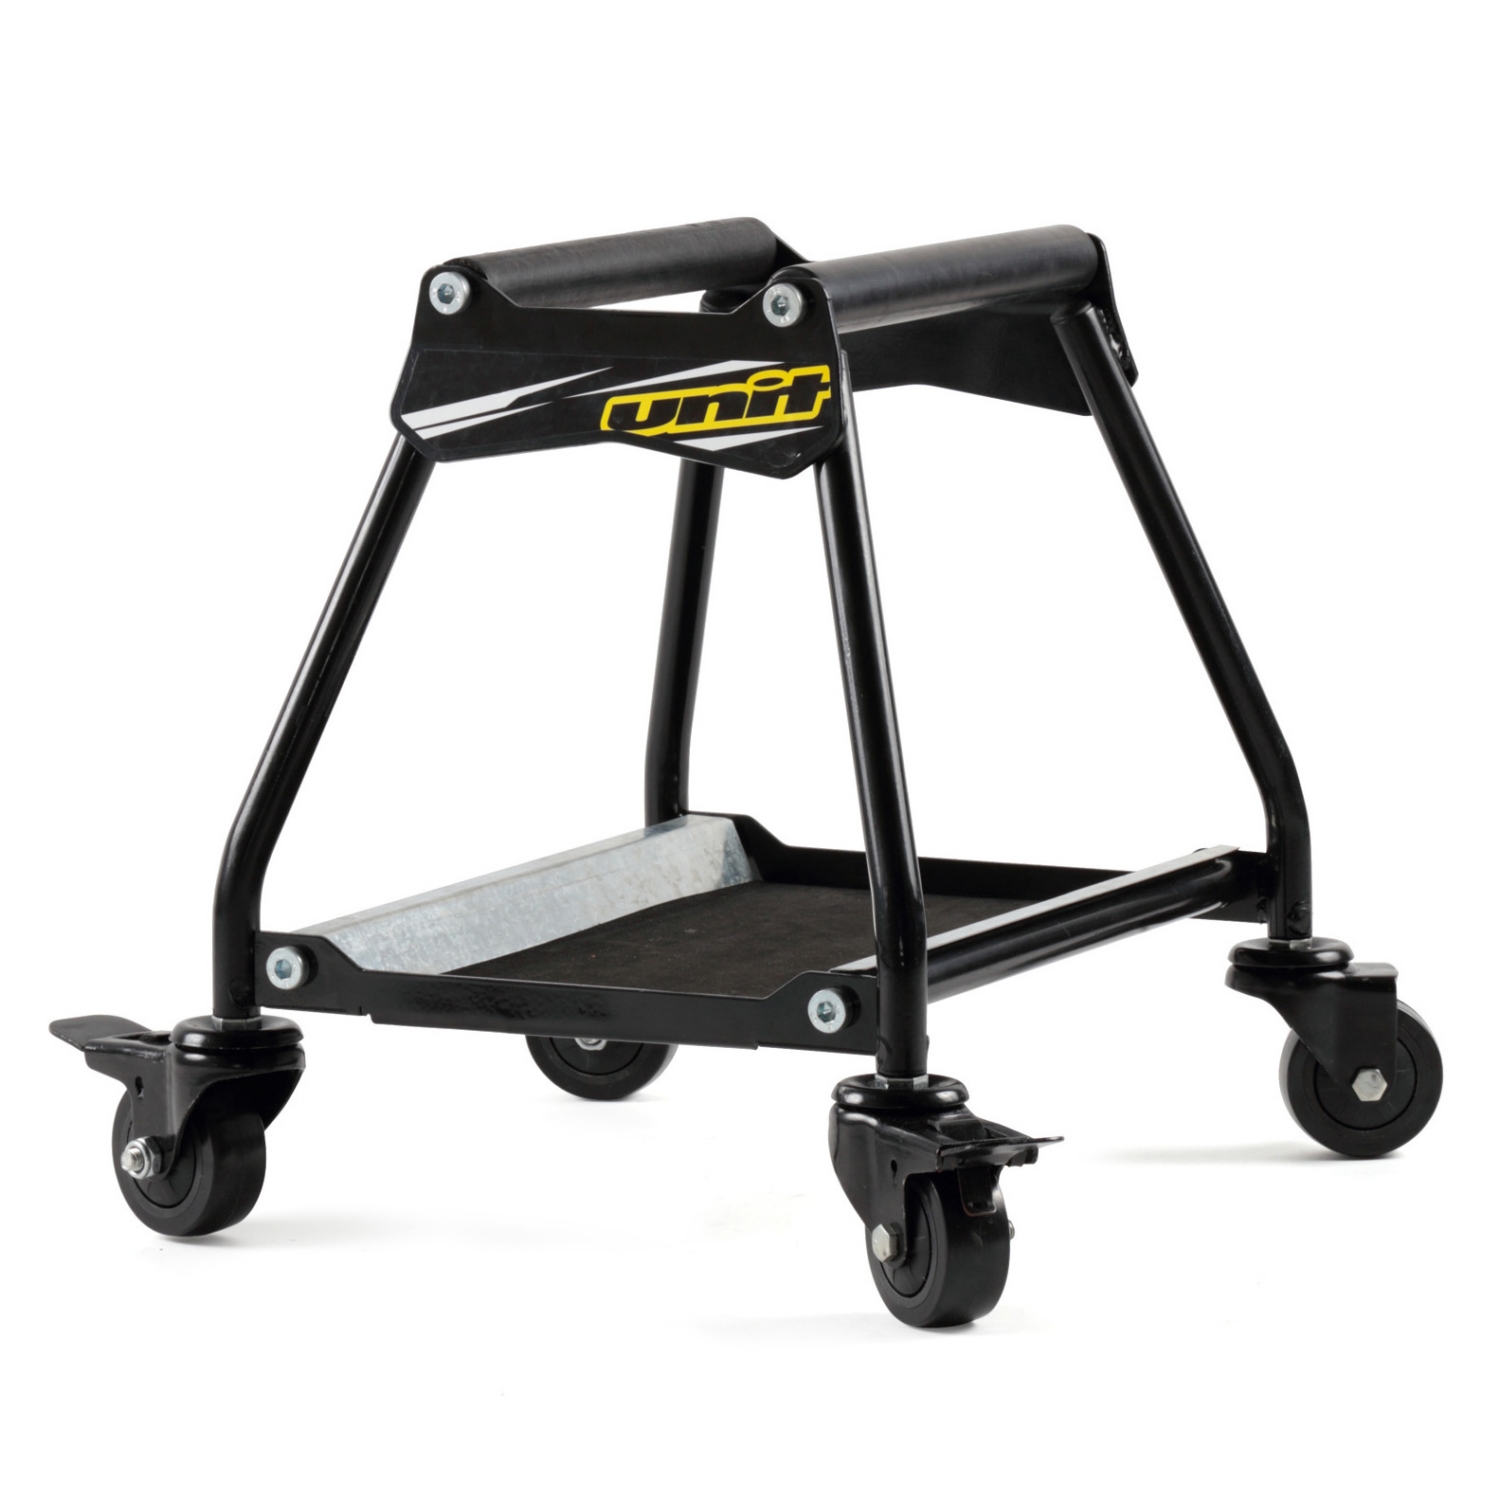 Kimpex Long Motorcycle Dolly Transportation Stand 1500 lbs 